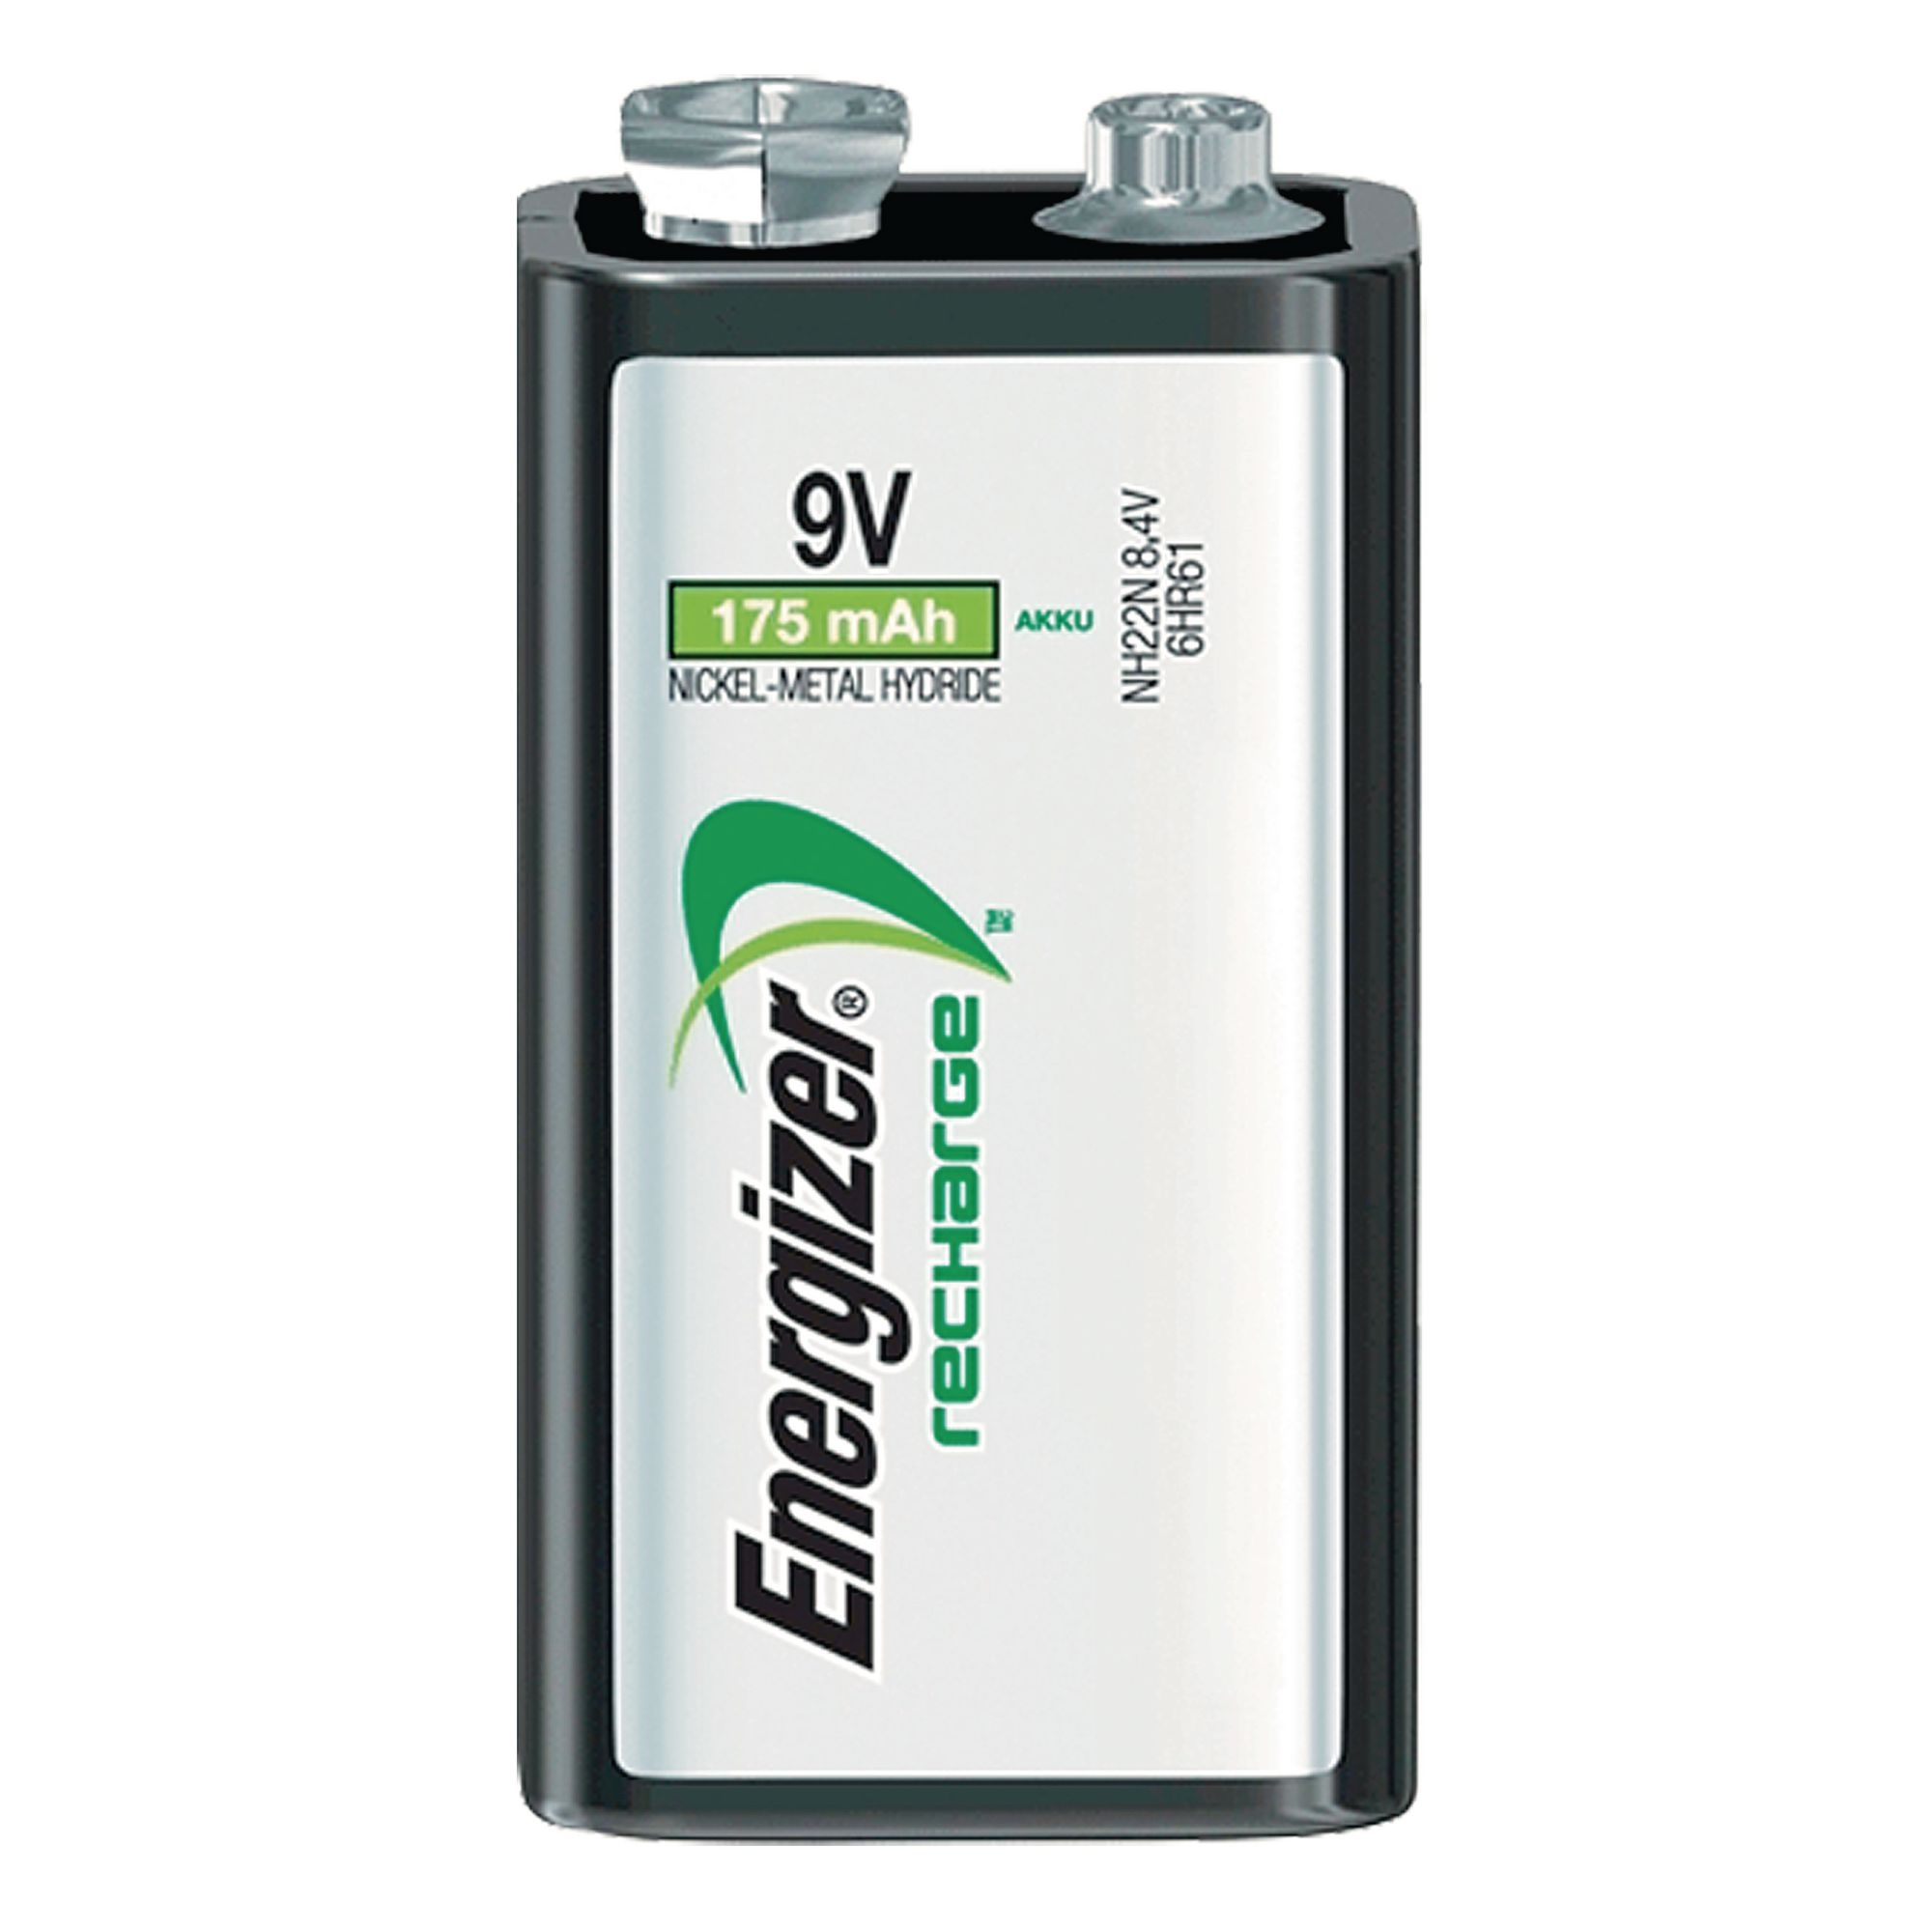 Rechargeable Nickel metal Hydride Battery - 9V, HR22